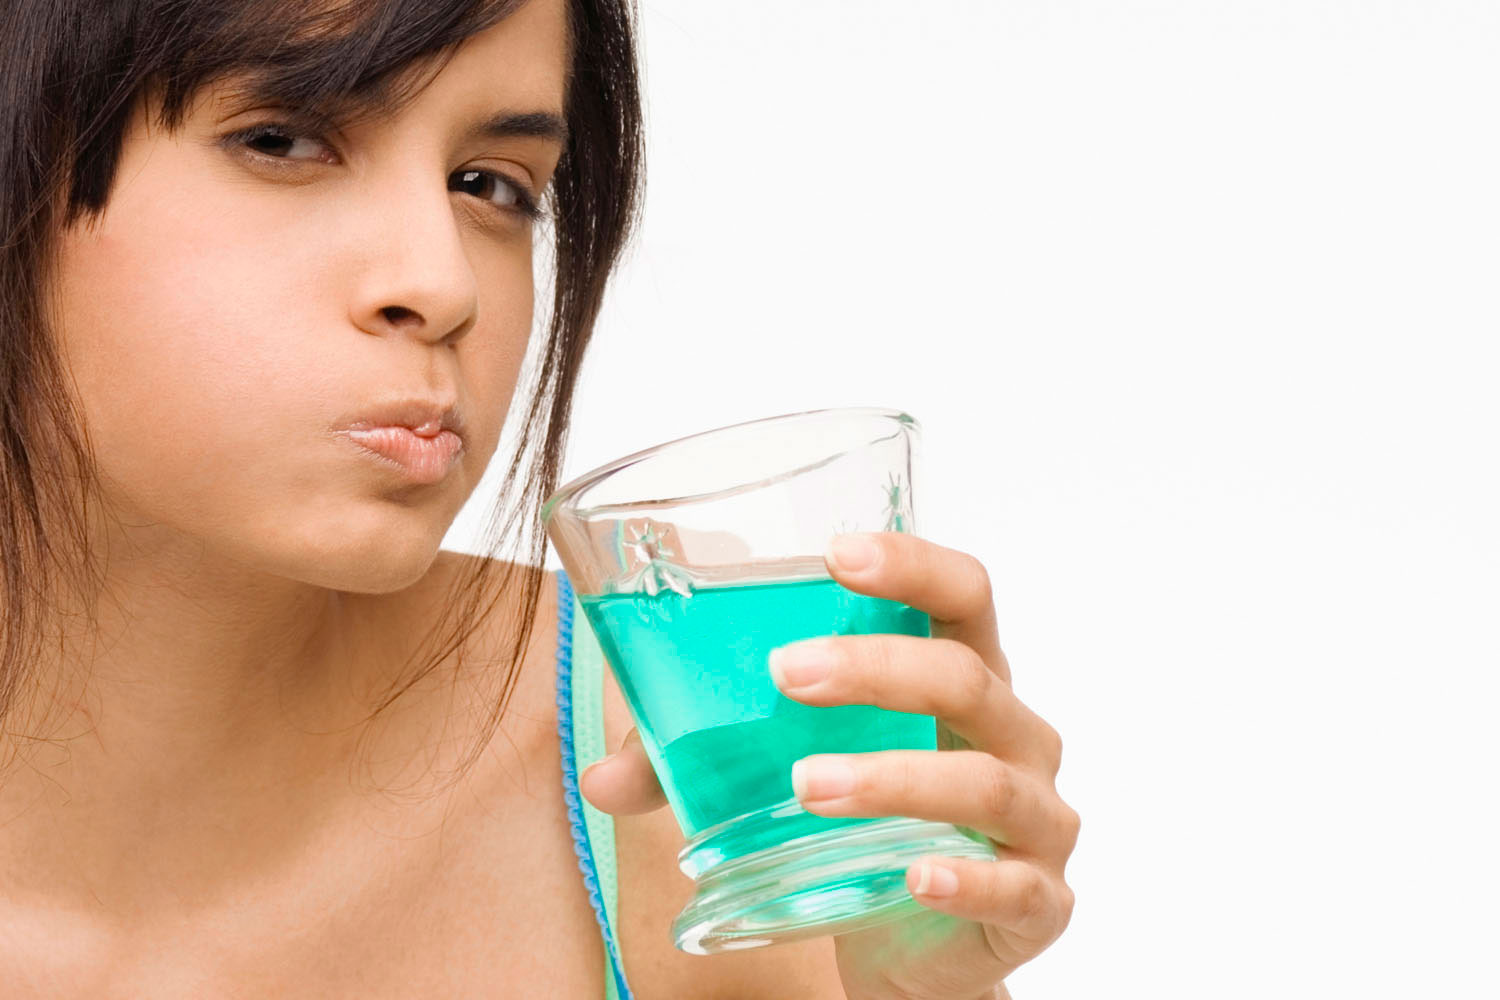 Mouthwash can help reduce the spread of coronavirus